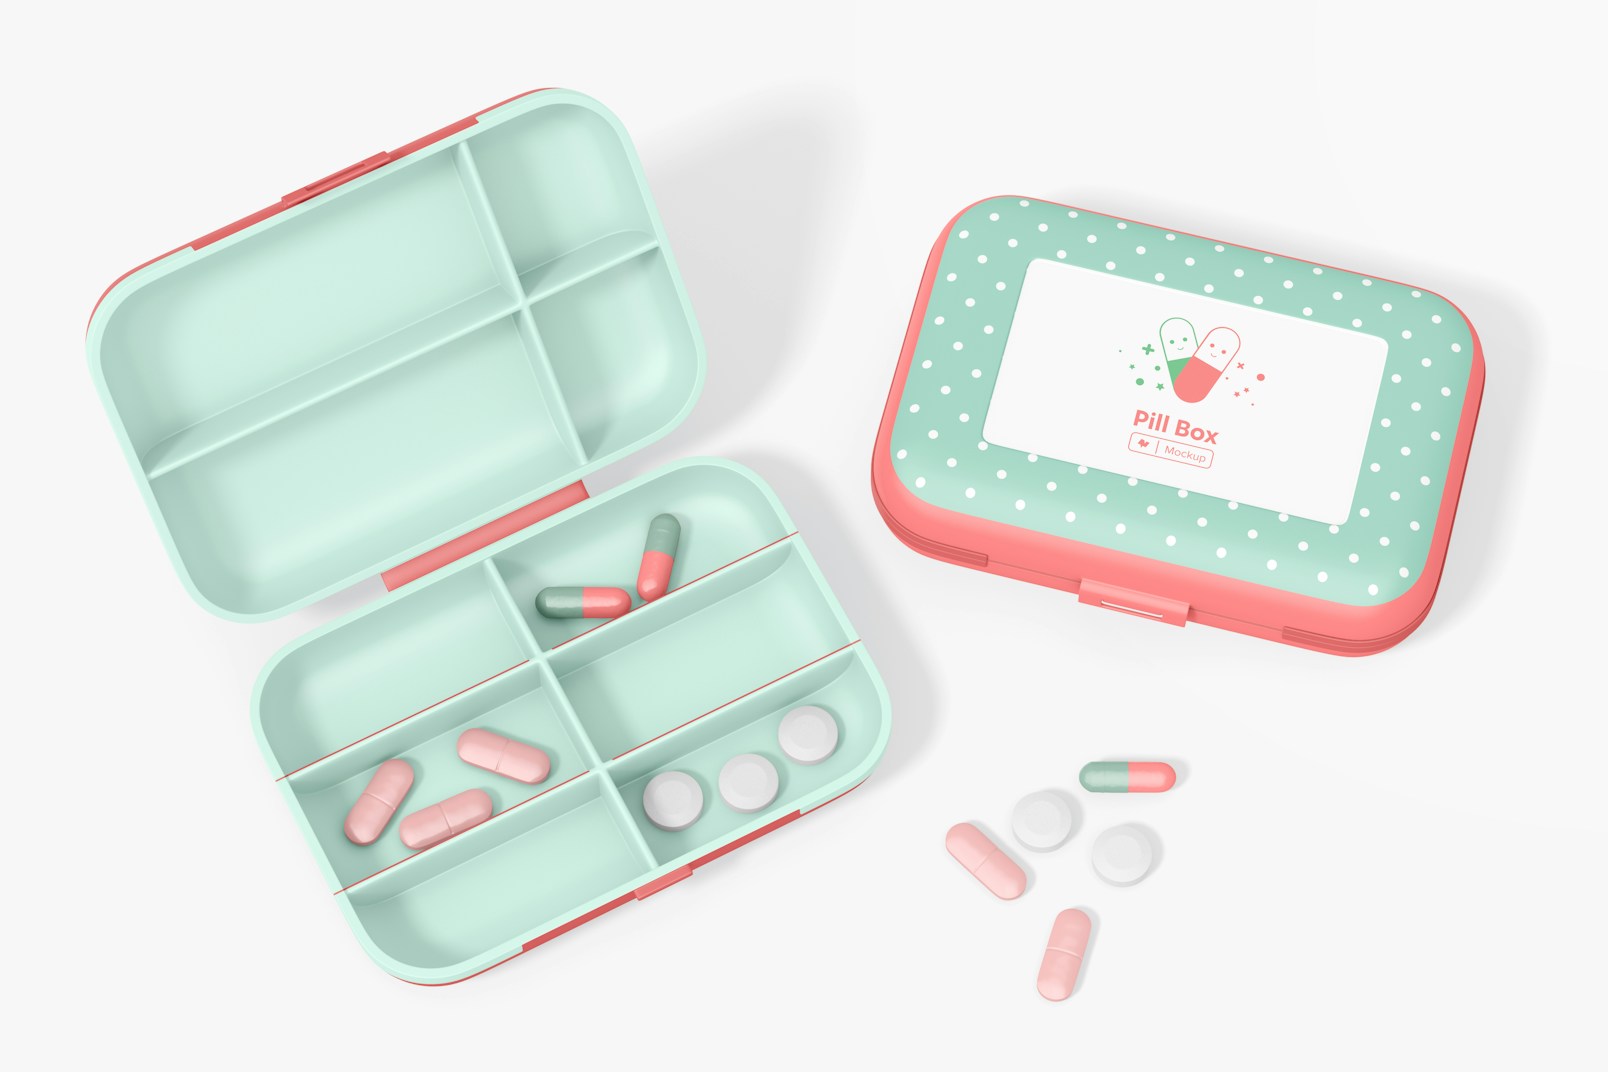 Double Sided Pill Boxes Mockup, Opened and Closed